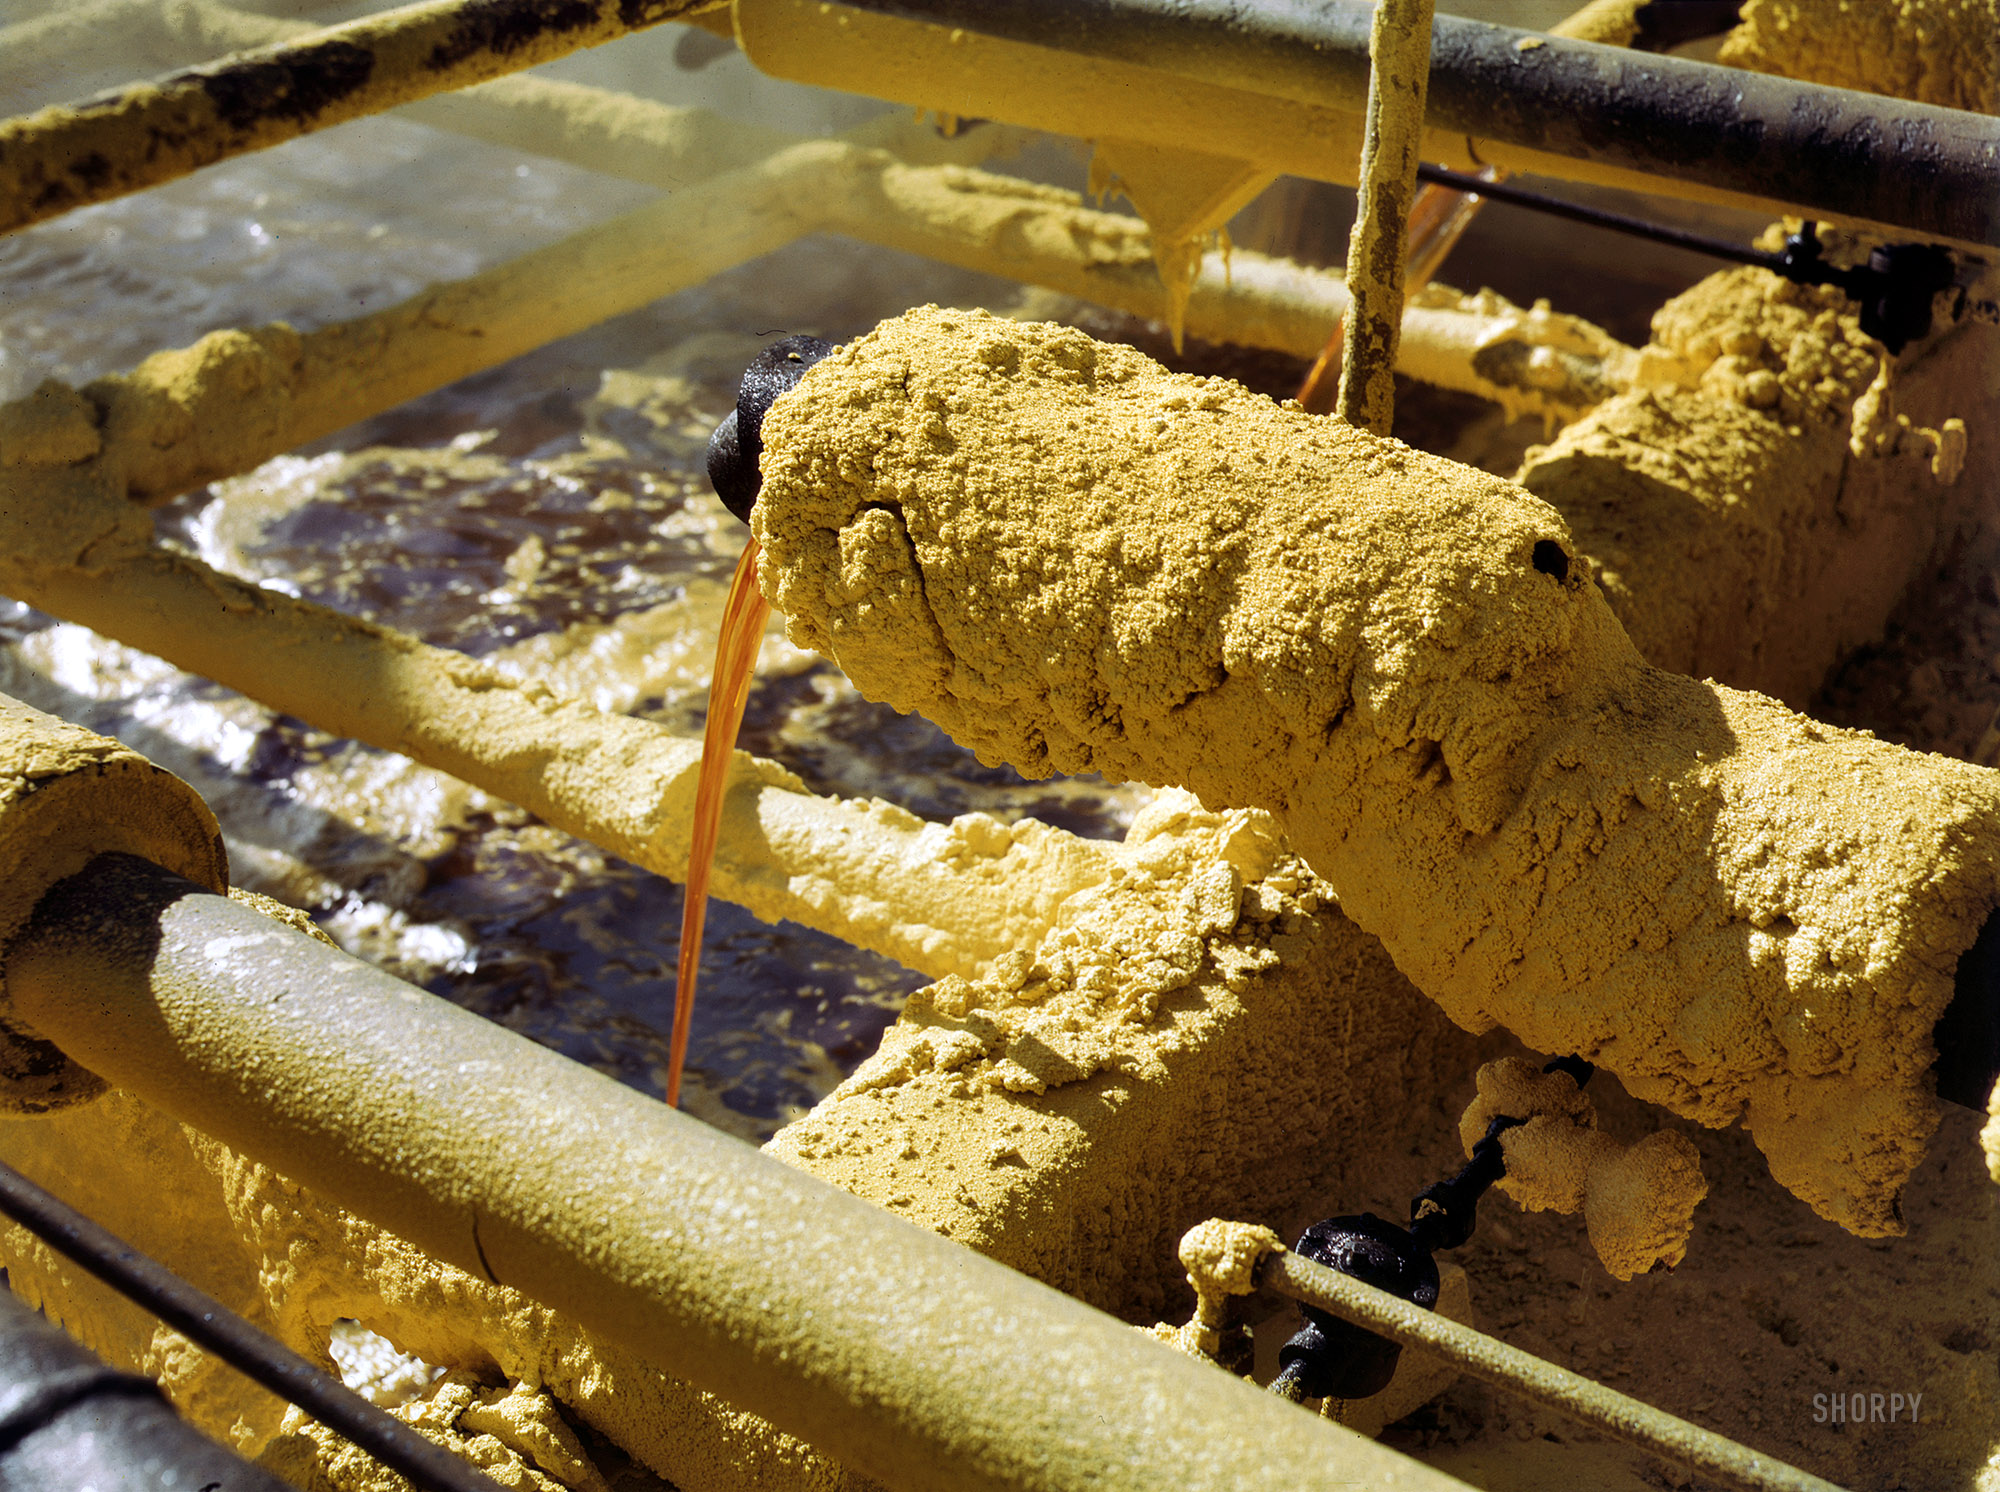 May 1943. "Melted sulfur from the wells pouring into relay station. Freeport Sulphur Co., Hoskins Mound, Texas." 4x5 Kodachrome transparency by John Vachon for the Office of War Information. View full size.